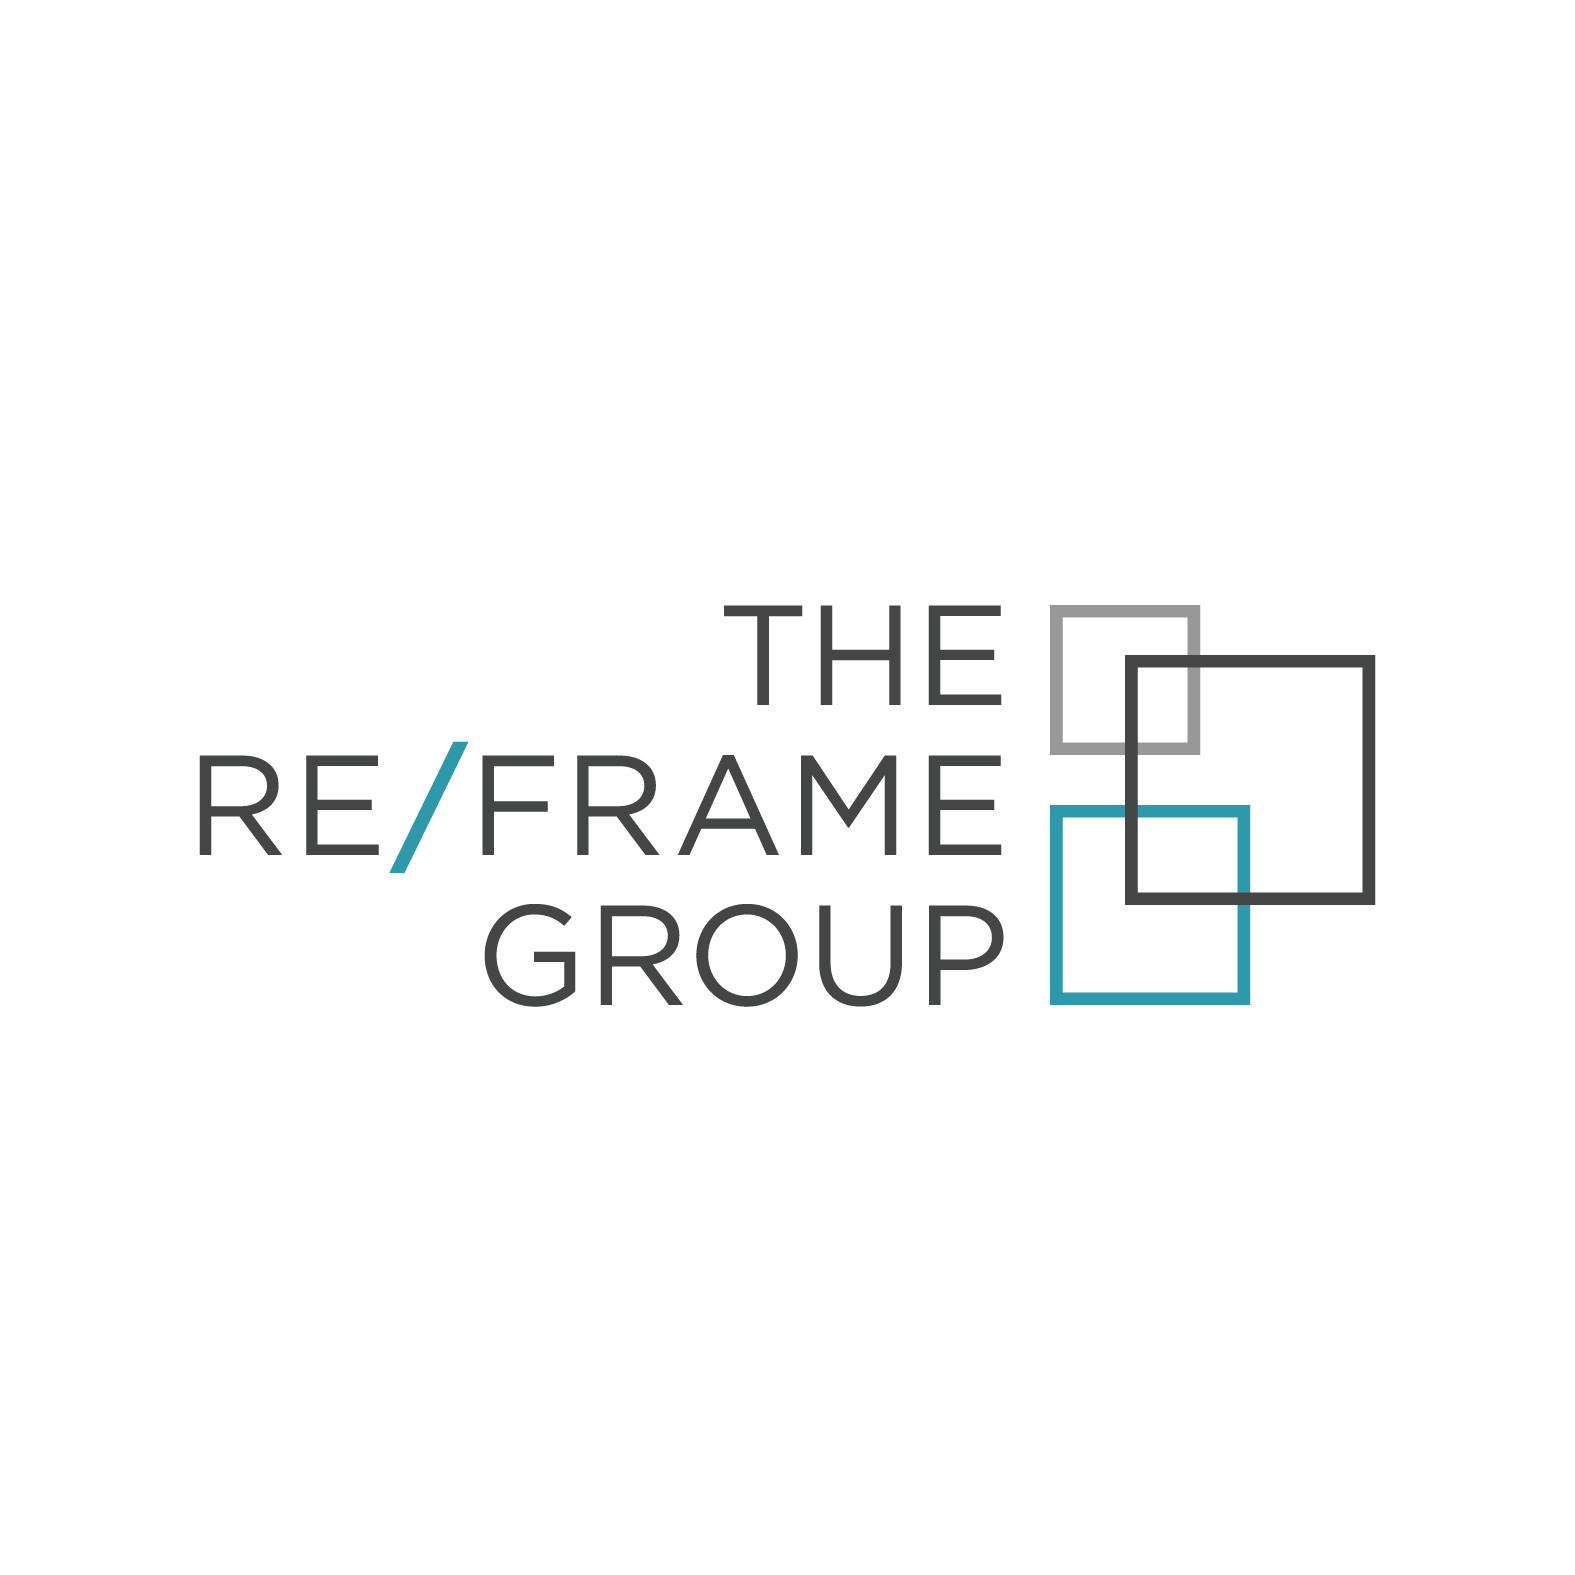 The ReFrame Group